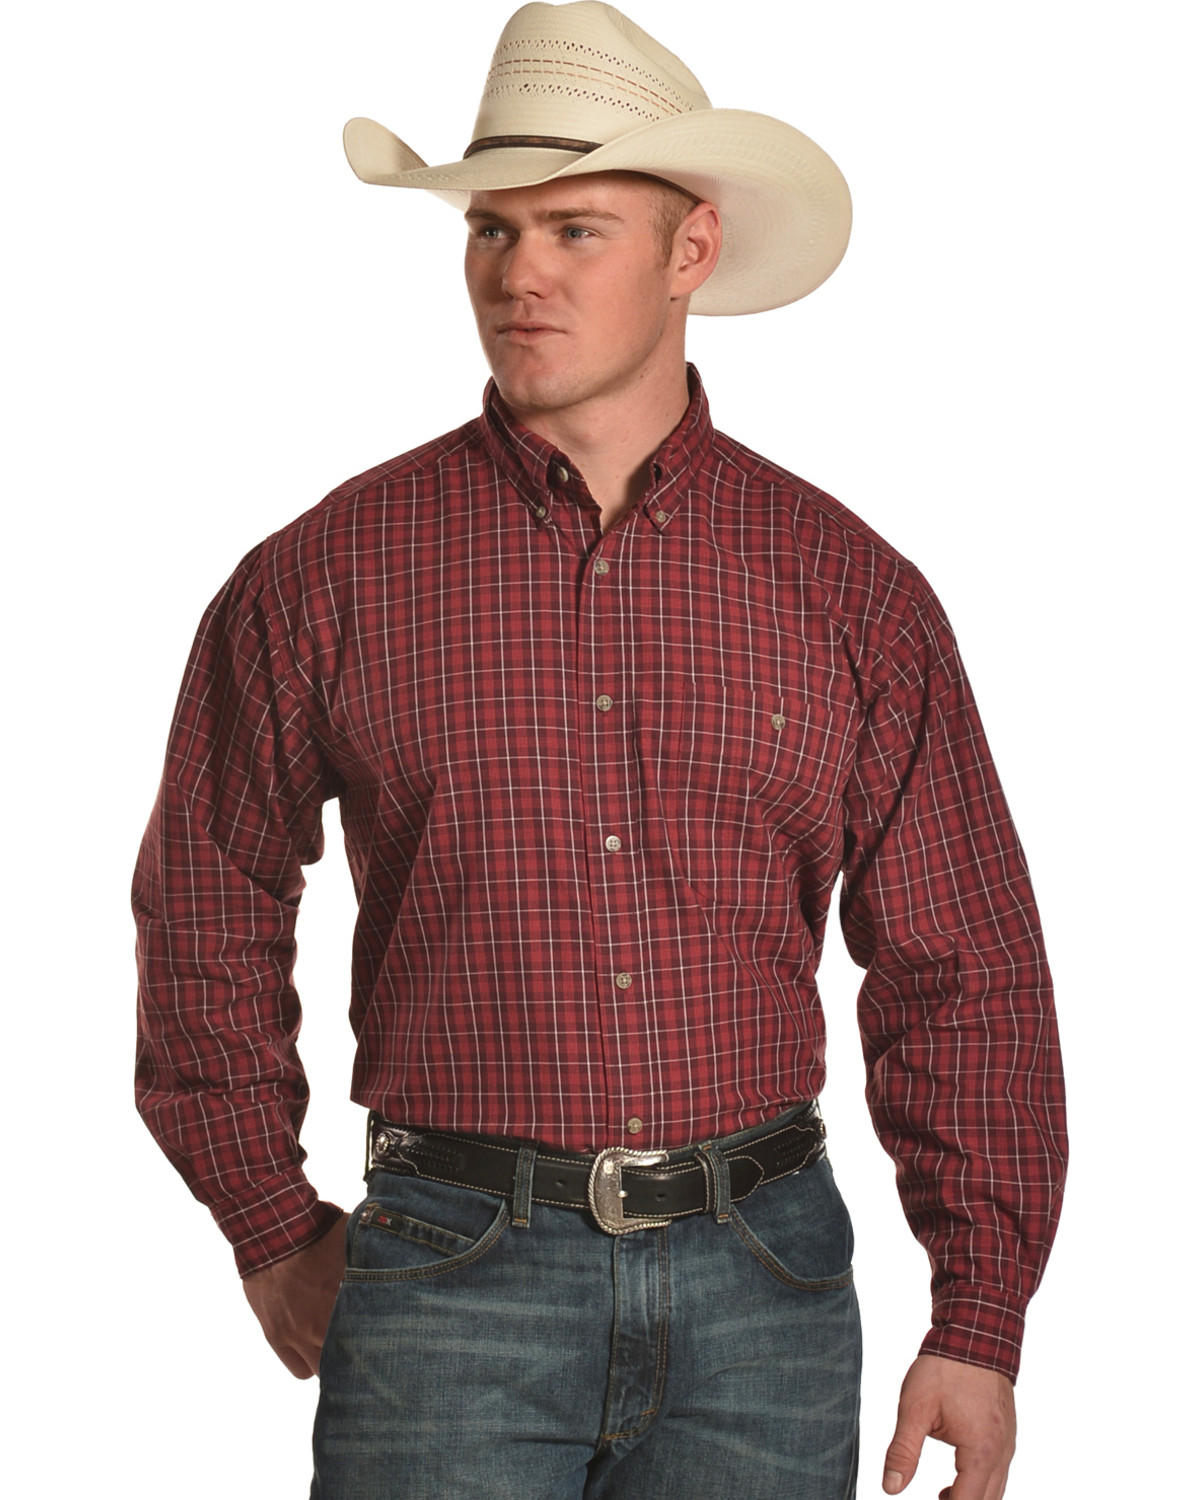 Mens Big And Tall Western Wear - Prism Contractors & Engineers